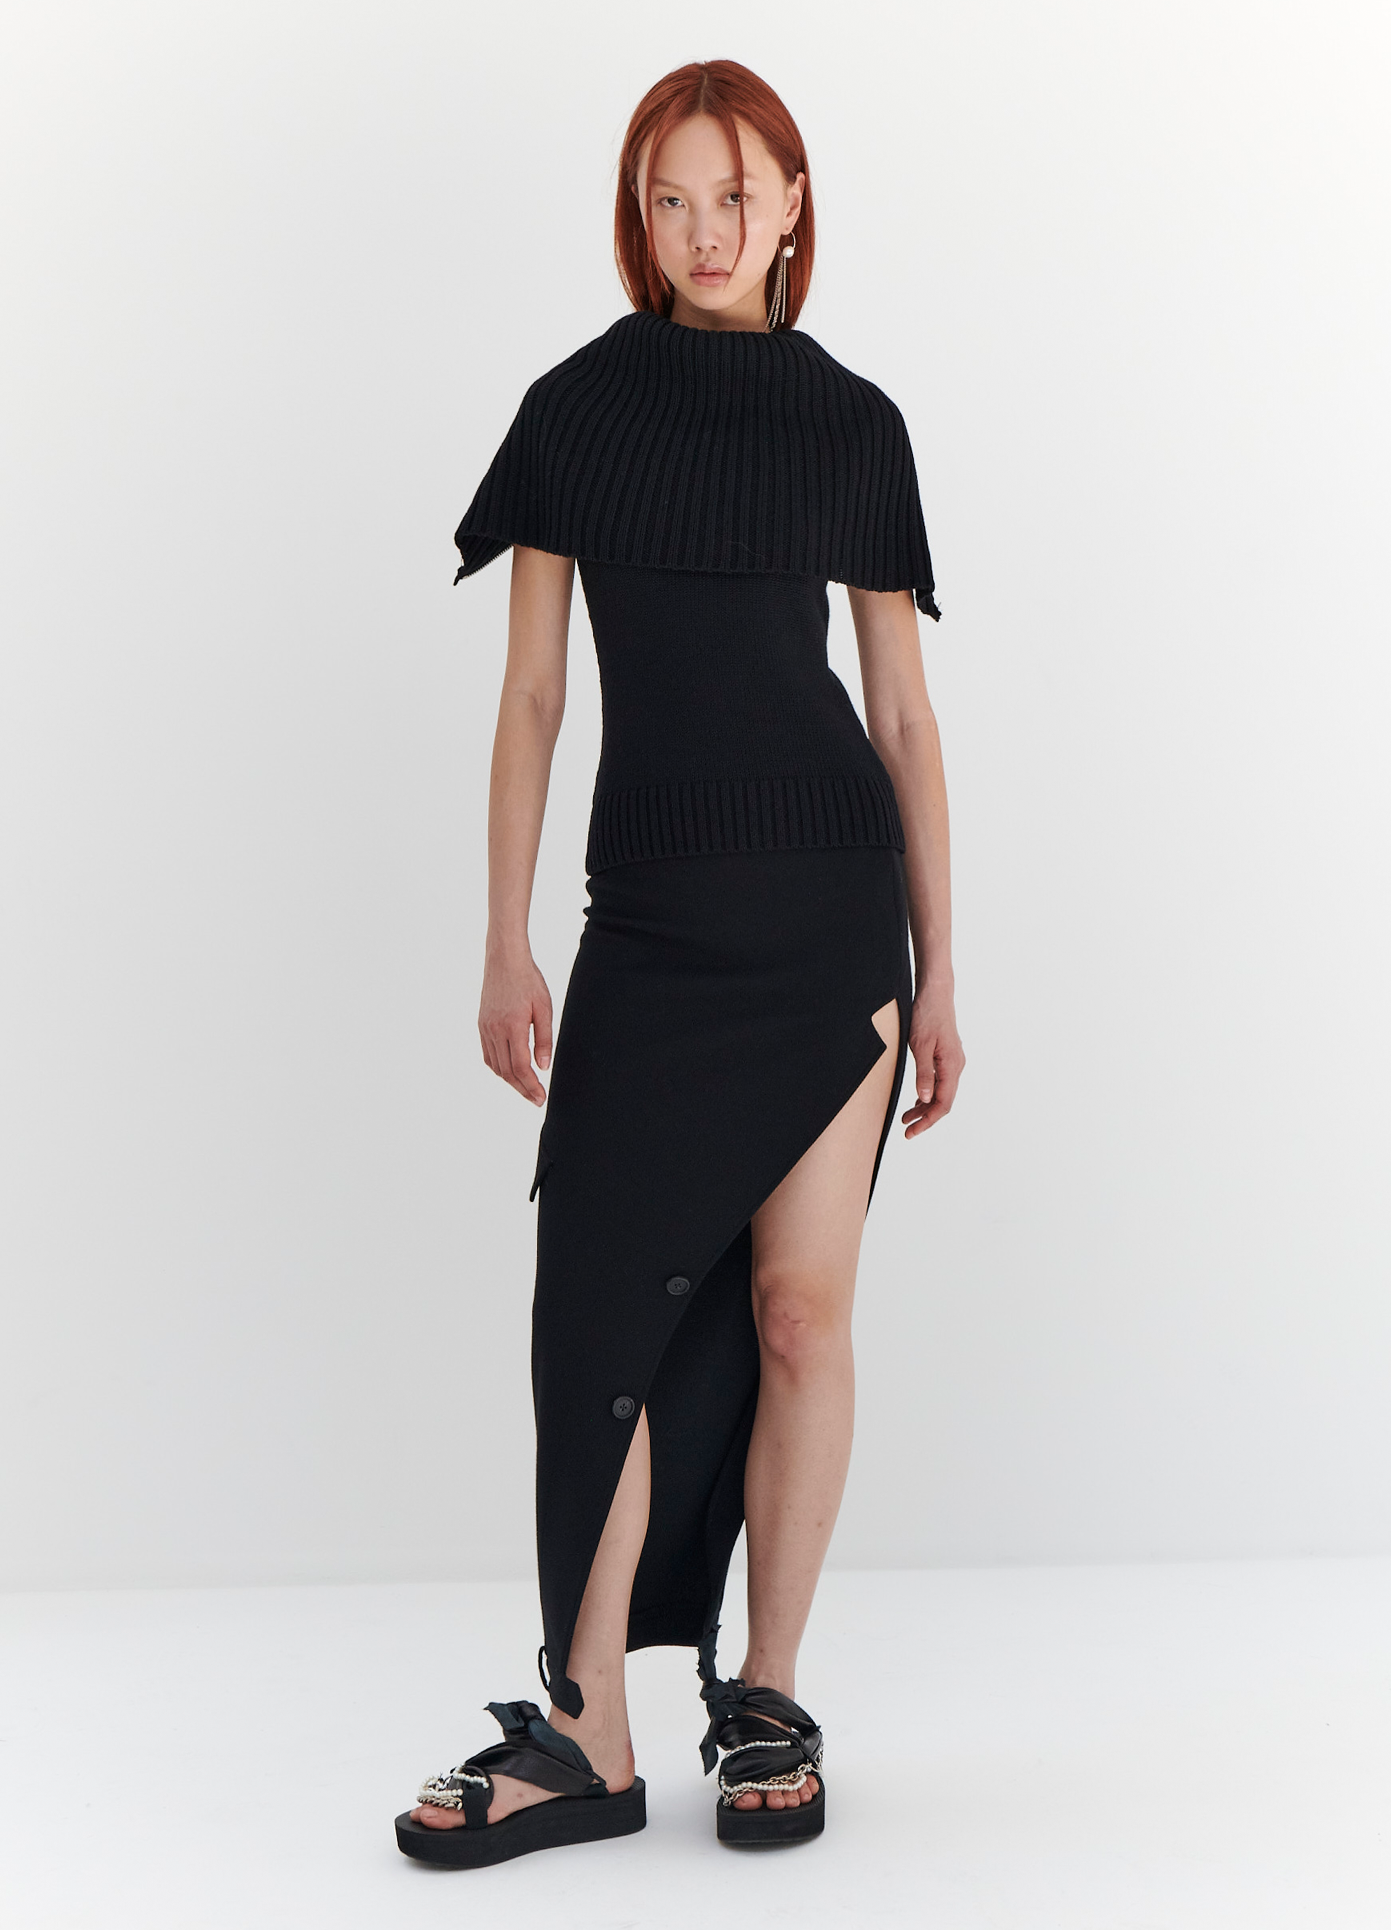 MONSE Sleeveless Double Collar Sweater in Black on model full front view